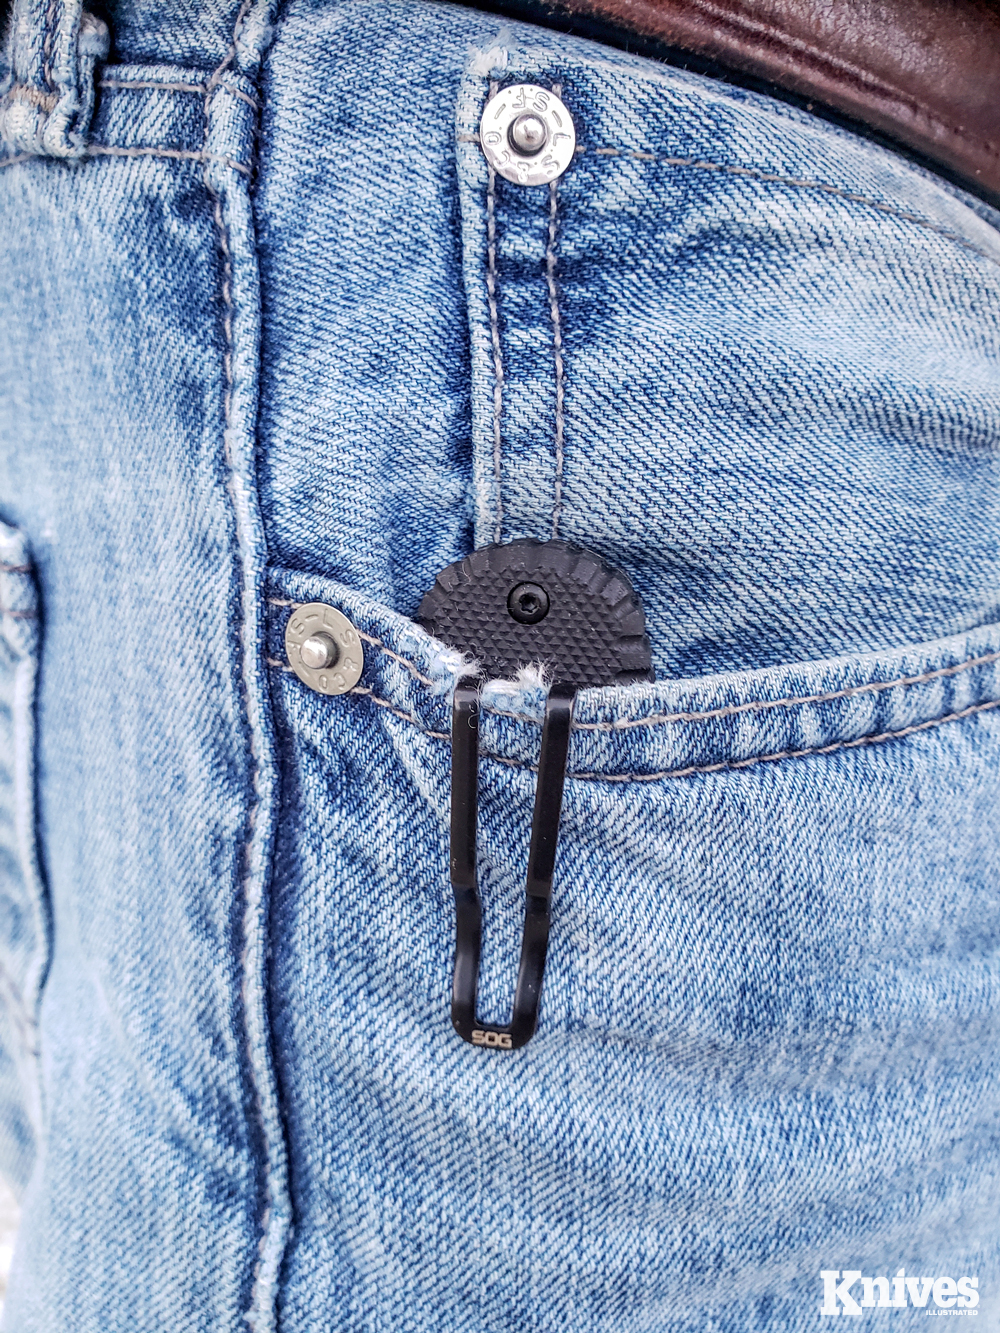 The deep carry pocket clip seats the knife unobtrusively in the pocket, yet still keeps it accessible for an easy draw.